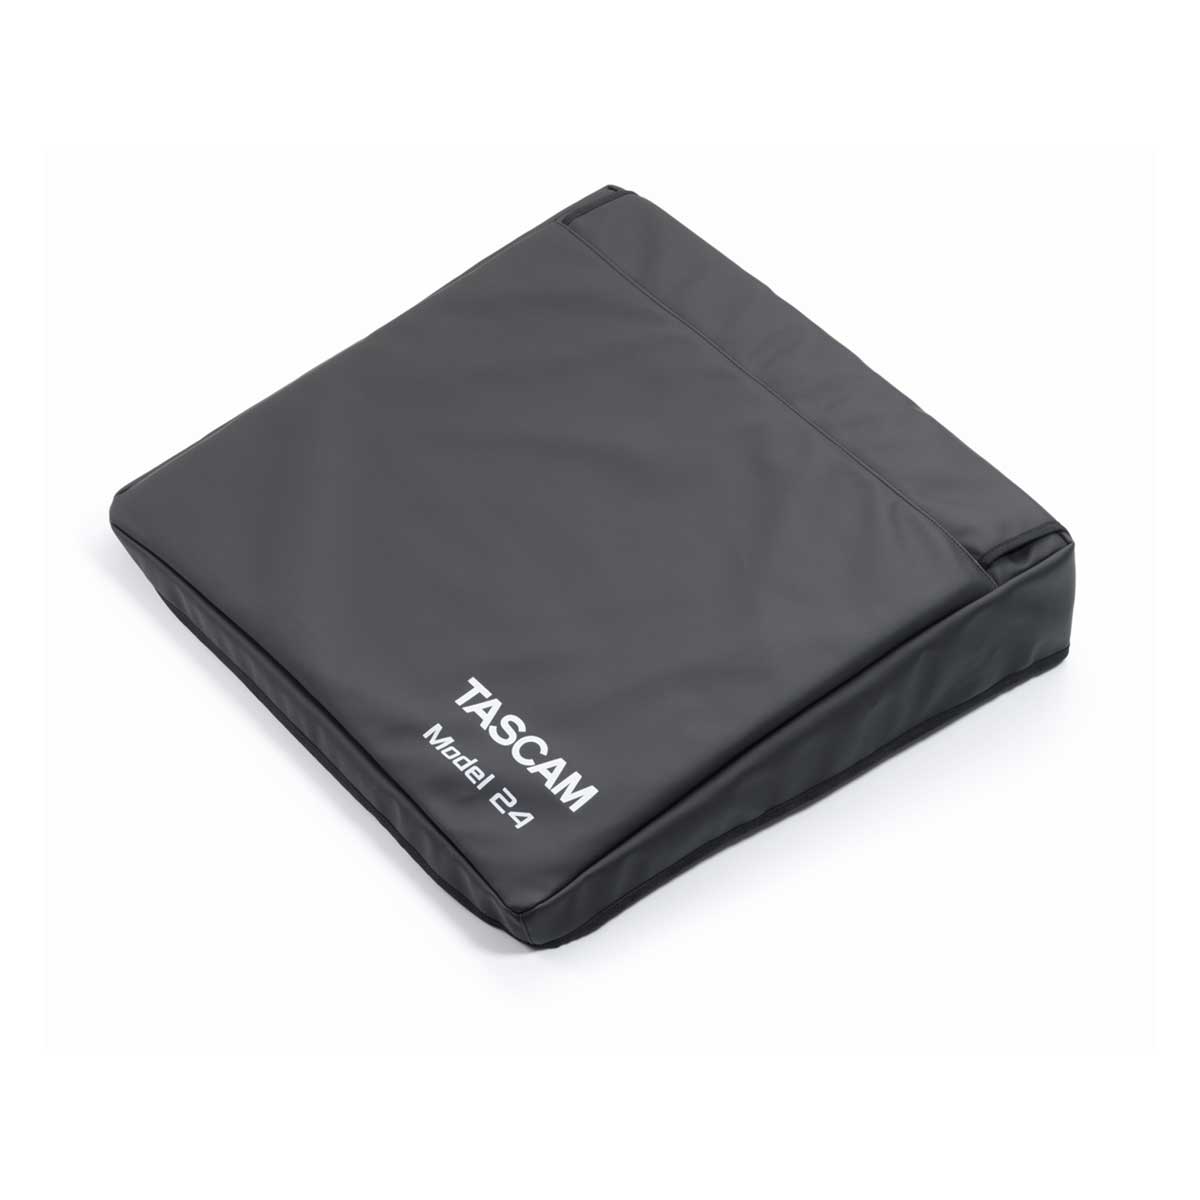 Tascam Dust Cover for Model 24, with flap for cables